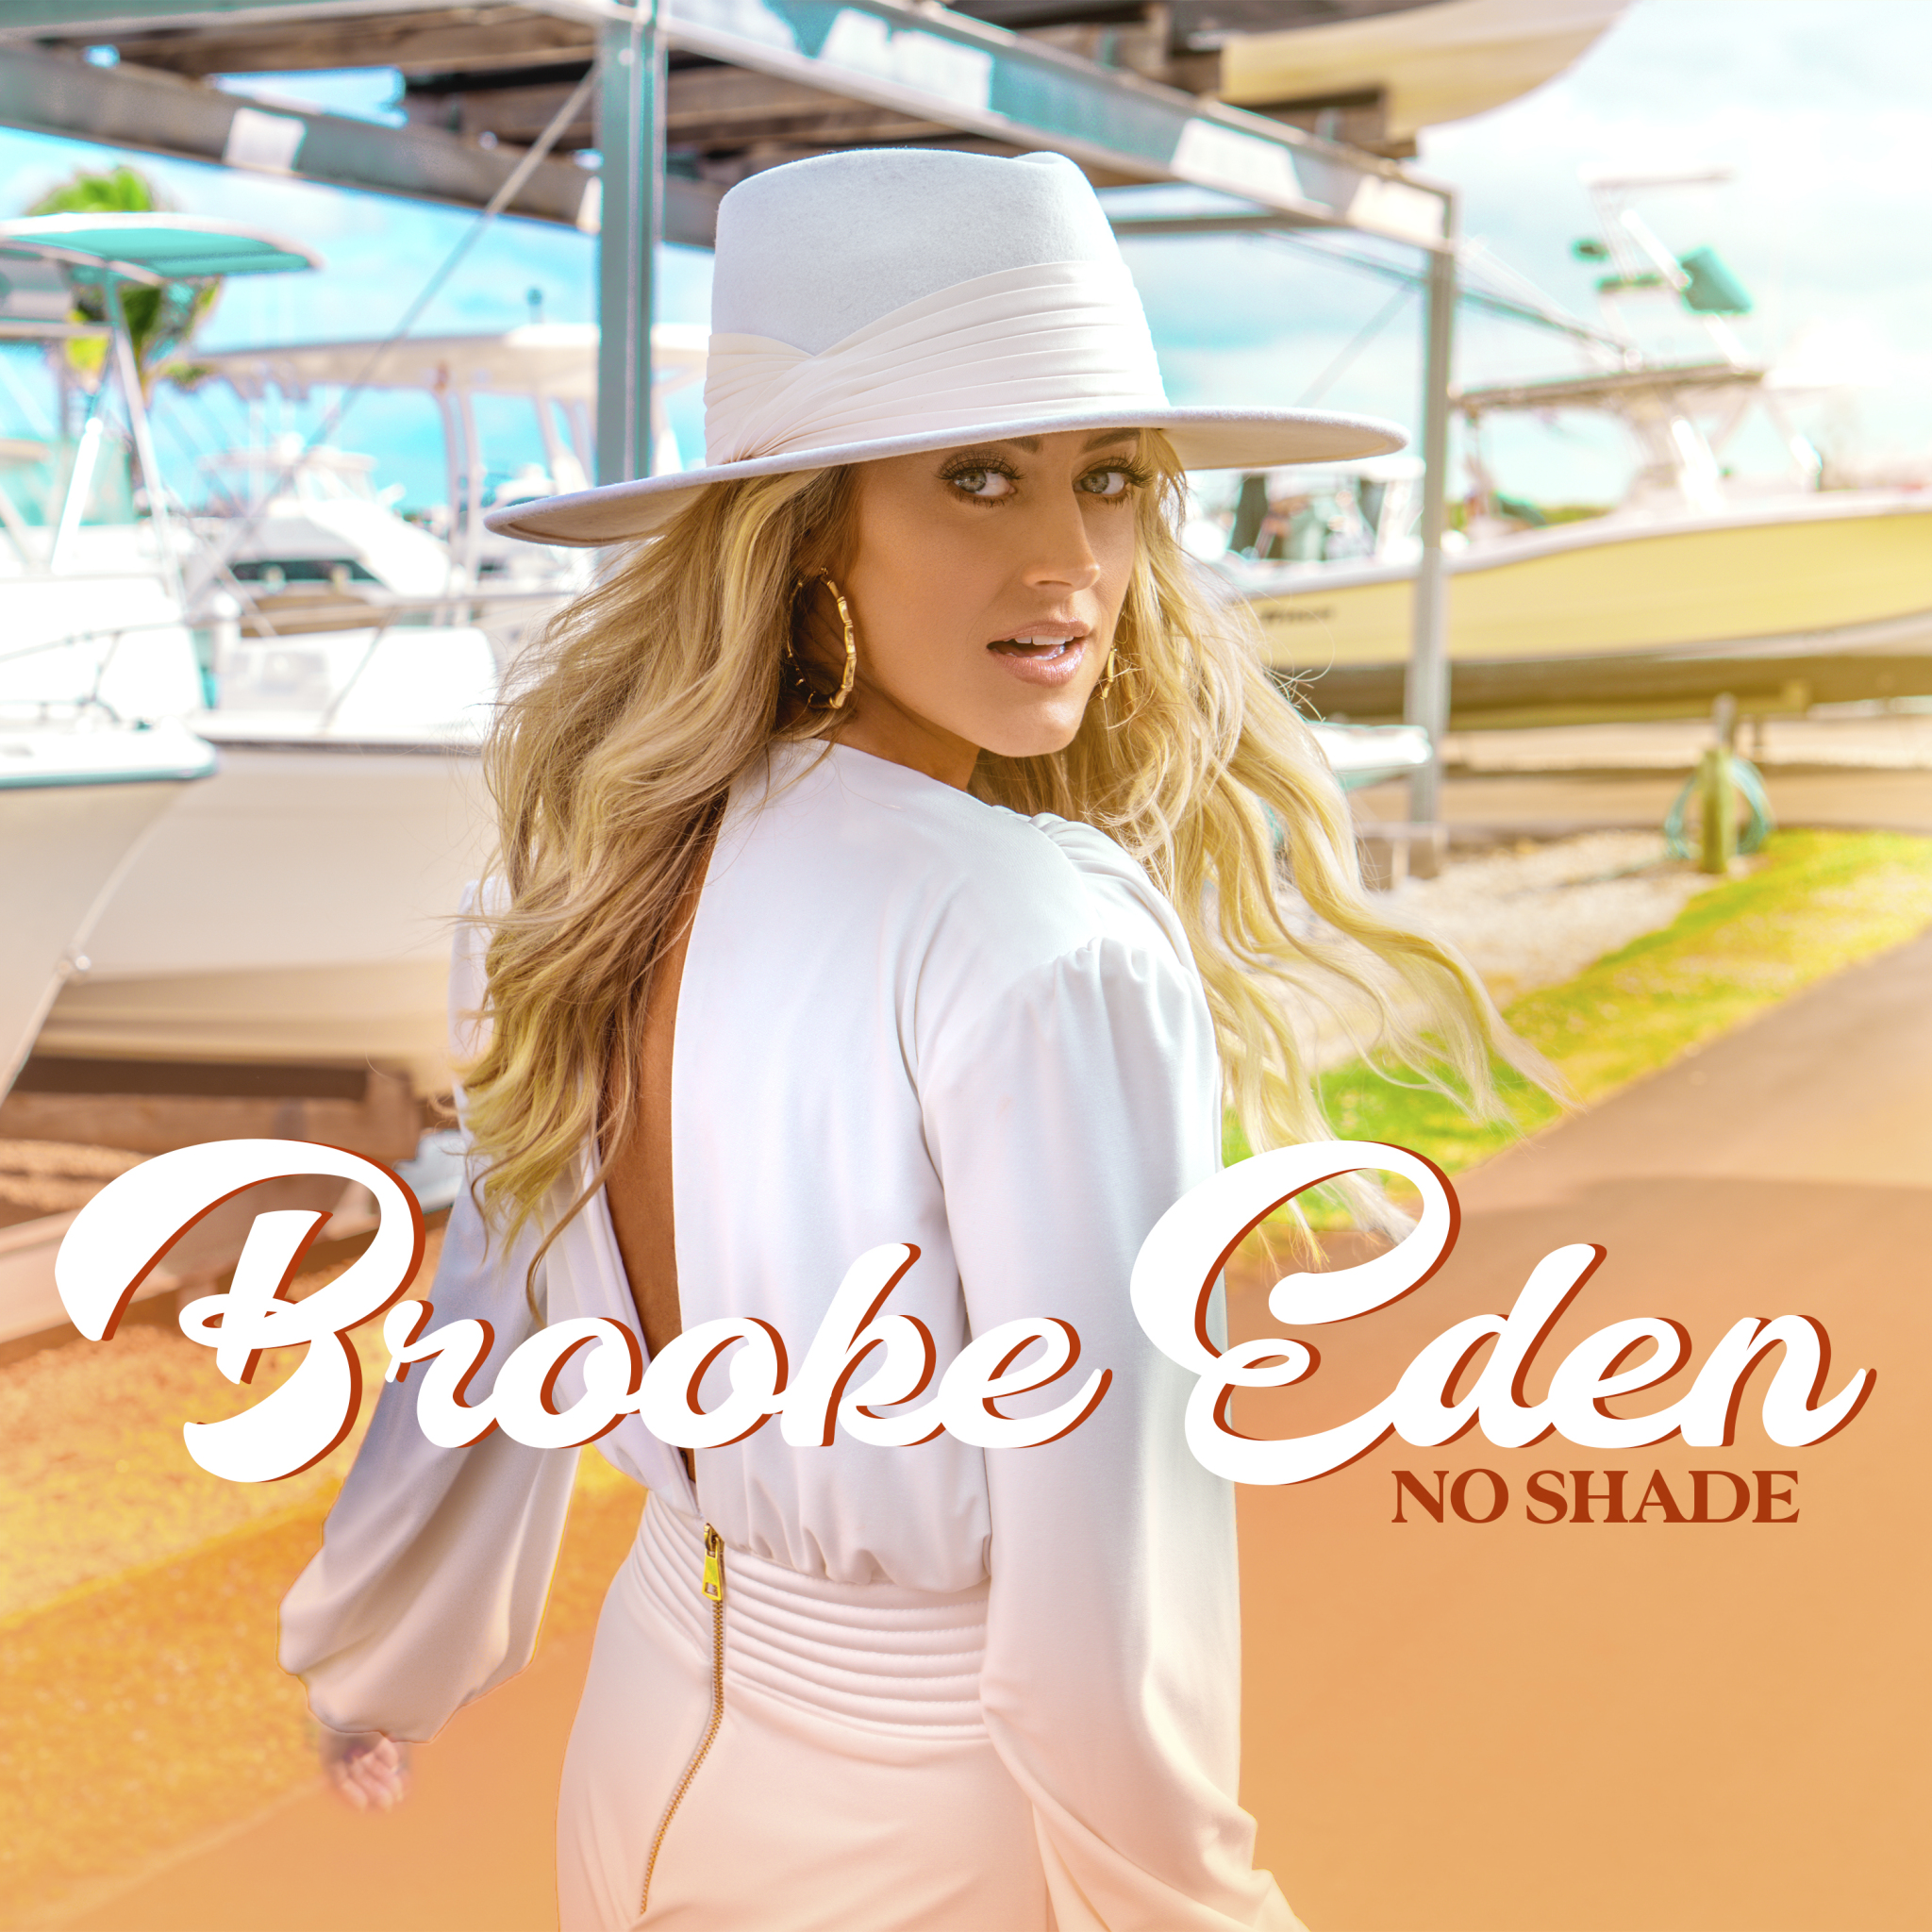 Brooke Eden’s new song “No Shade” is available now, February 5th